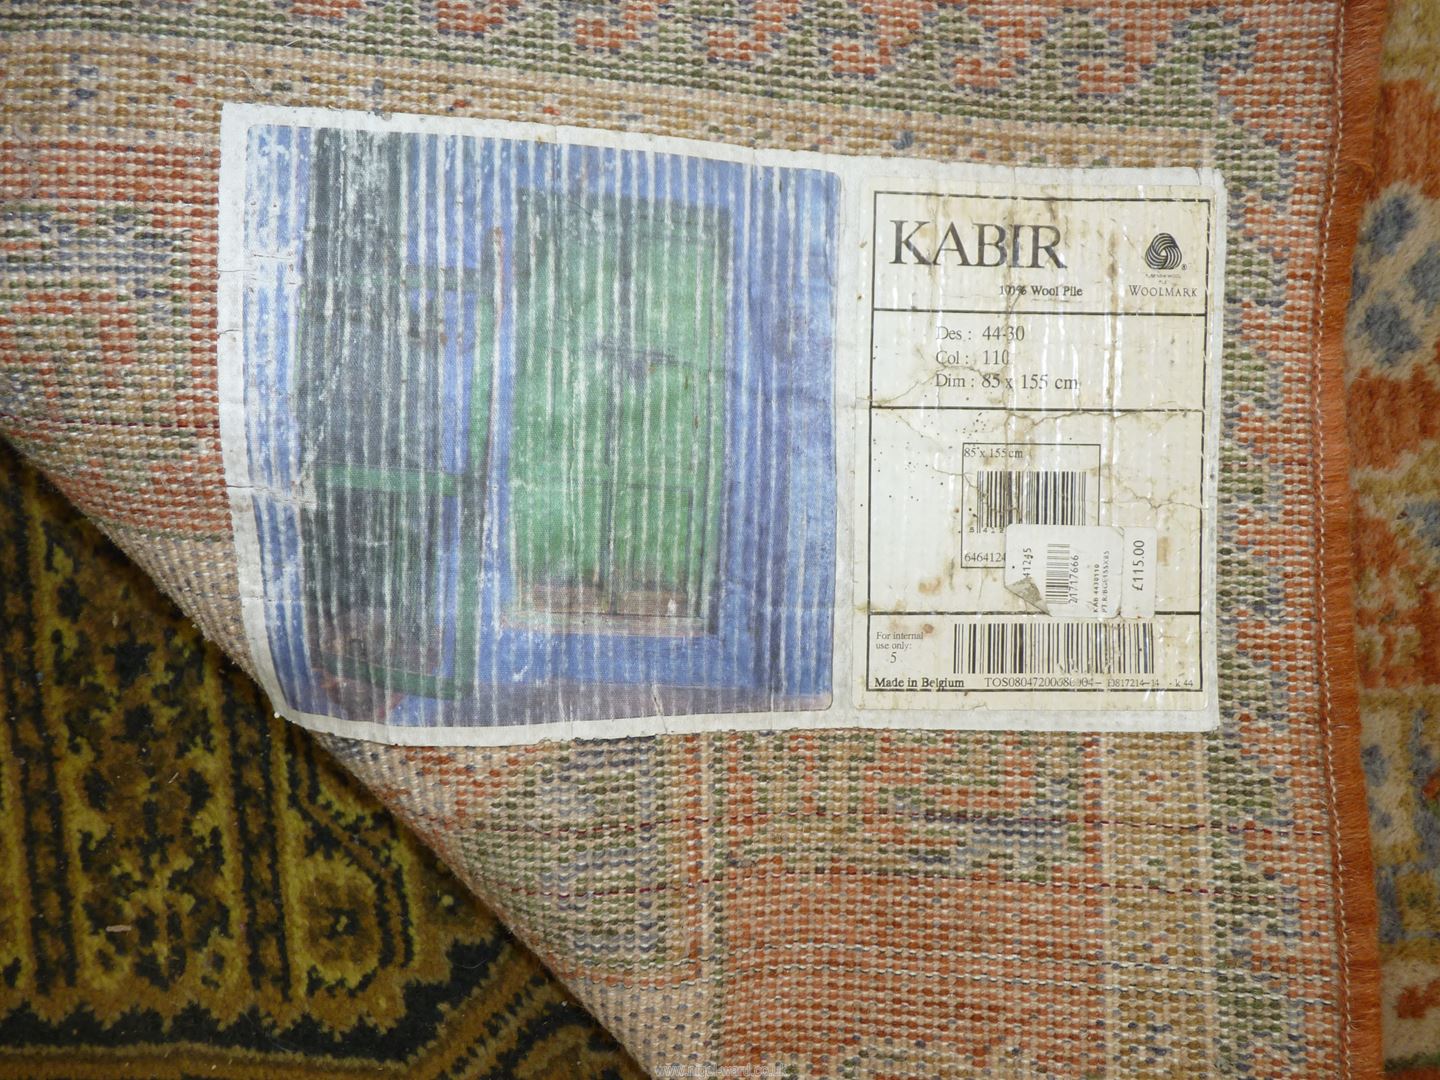 A Kabir pure wool hearth rug with borders of symbolic patterns in terracotta, - Image 3 of 3